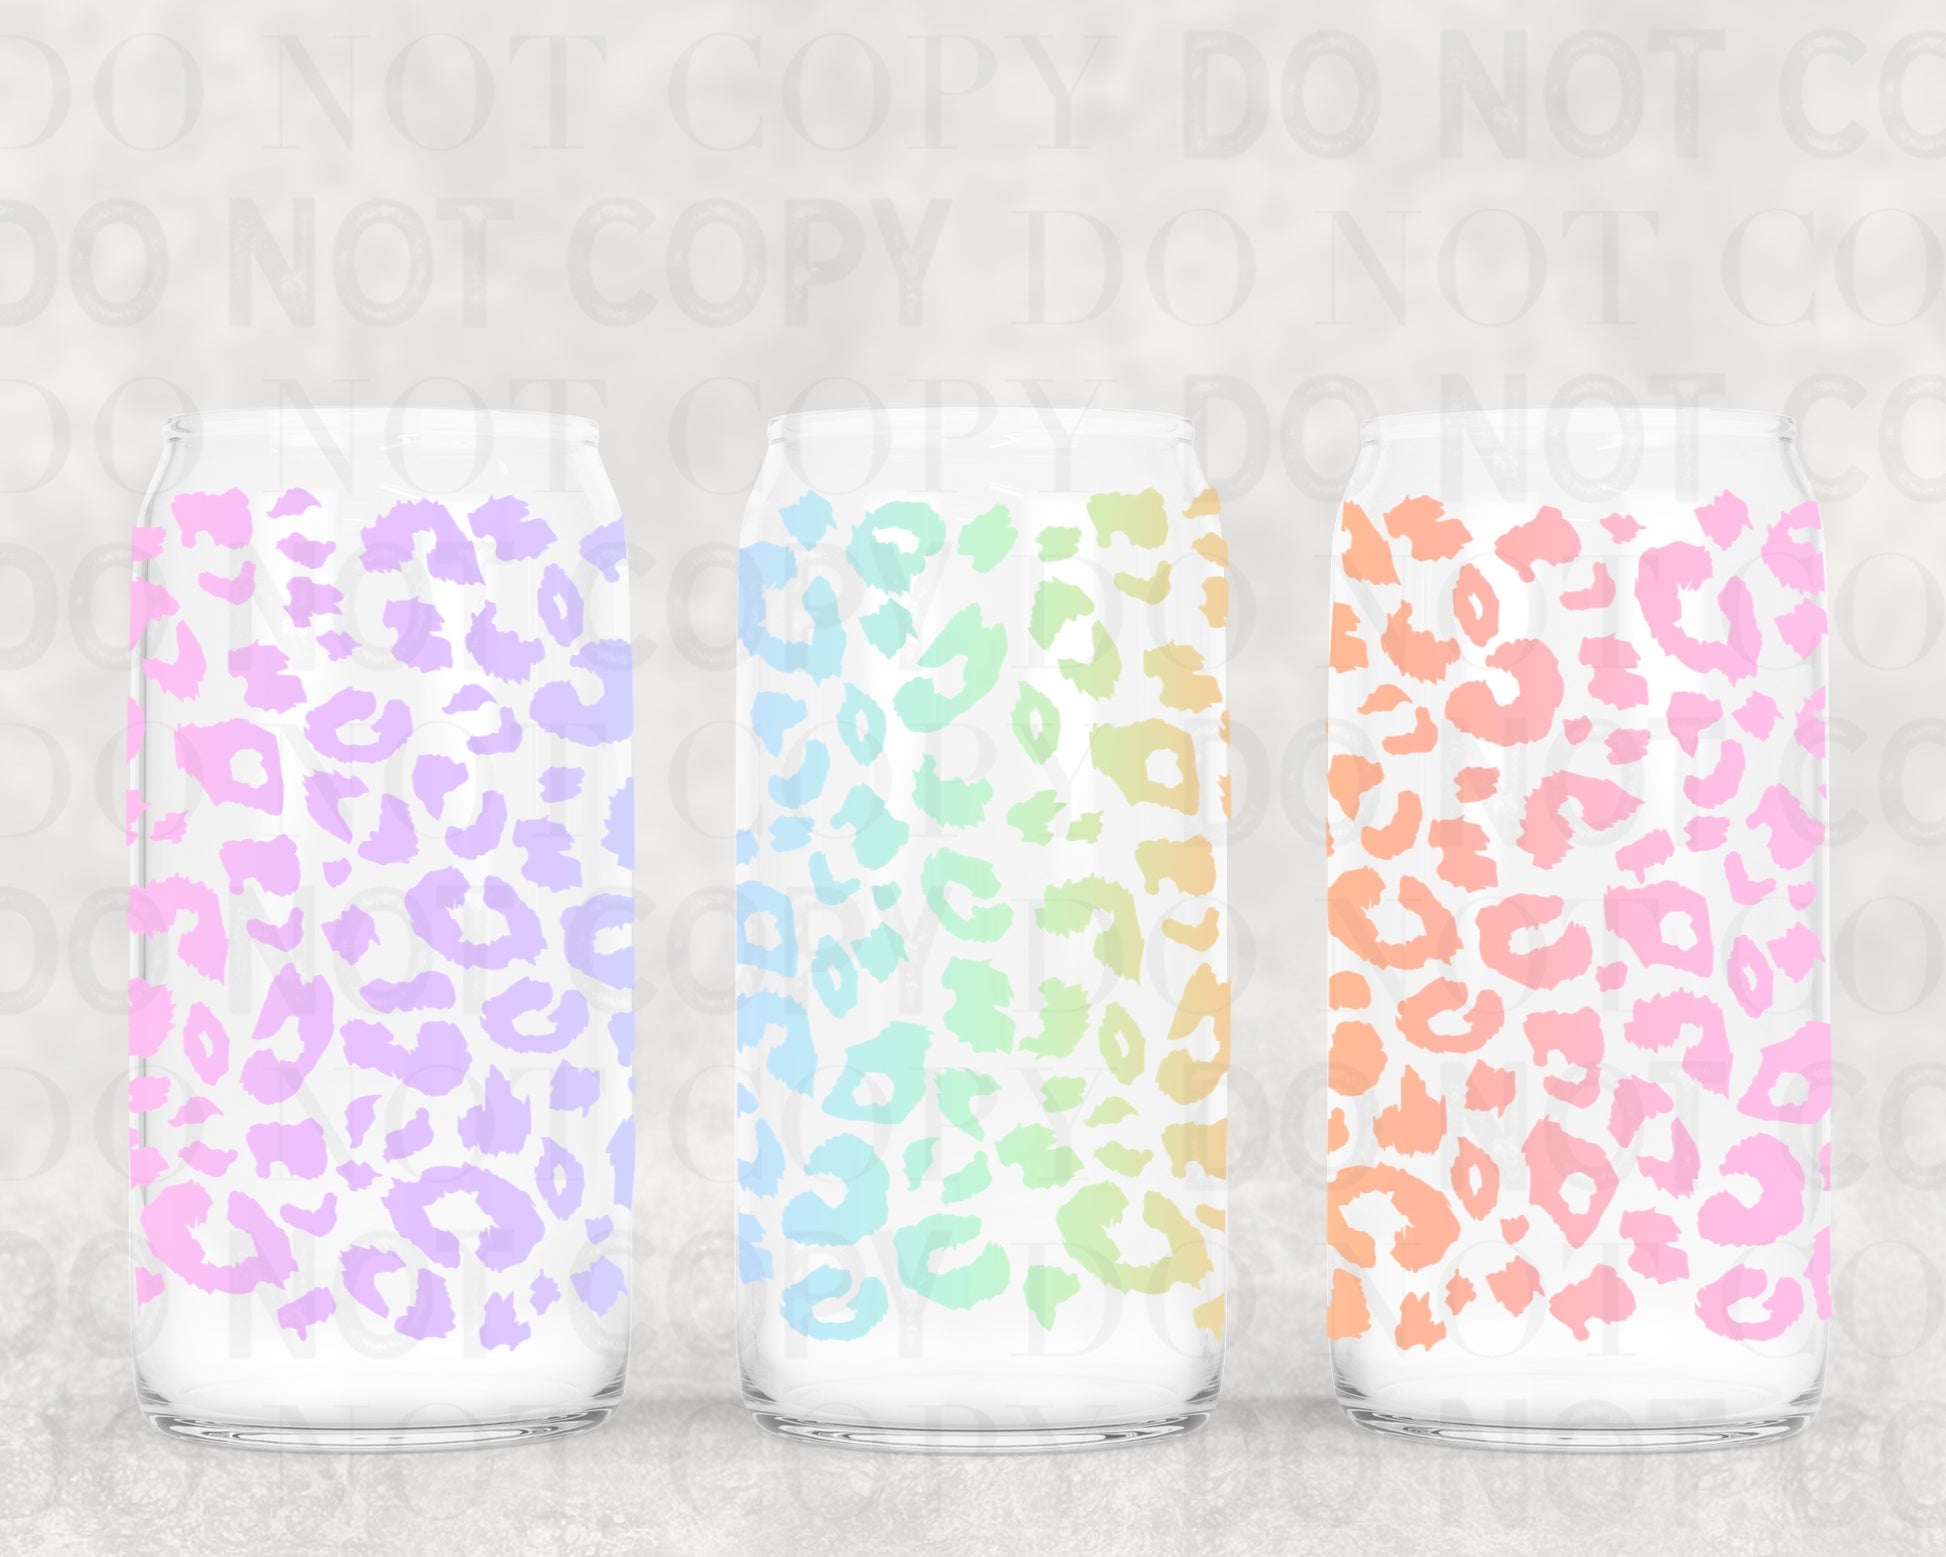 Rainbow cheetah tumbler wrap sized for 16 oz frosted cup from mother tumbler  Cerra's Shop Creates   